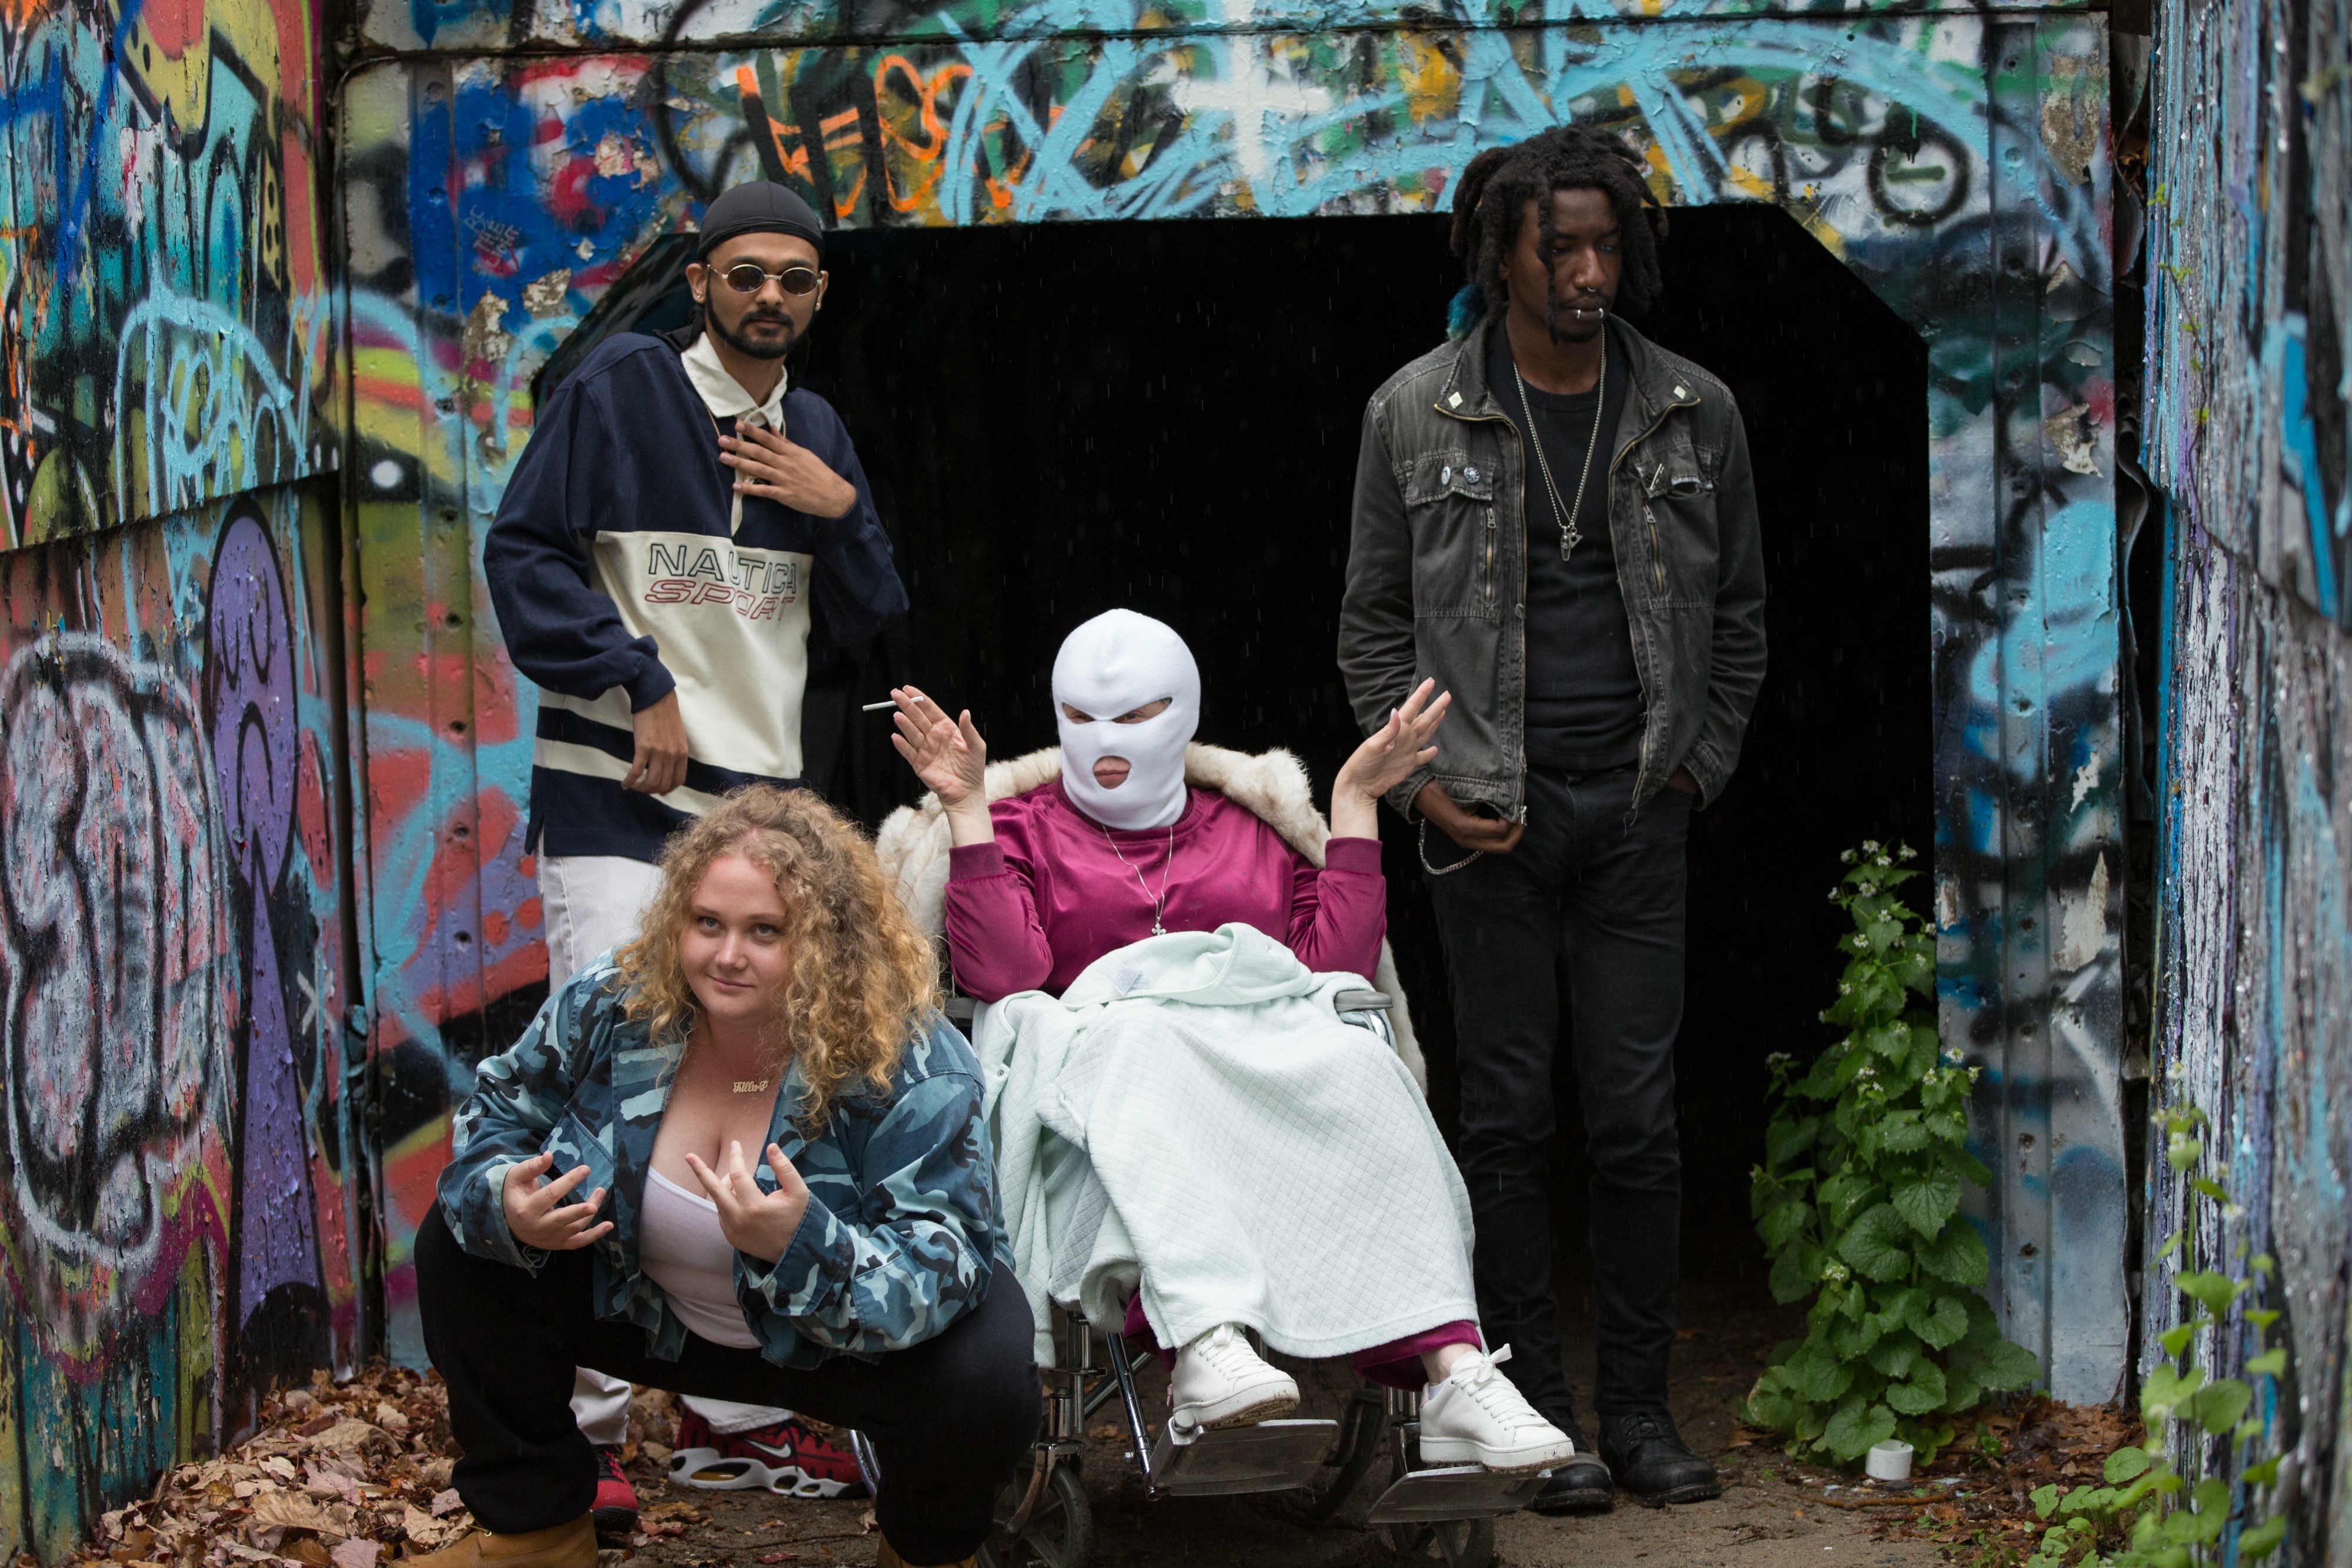 Interview with Danielle Macdonald, star of Patti Cake$, Skin and I Am Woman